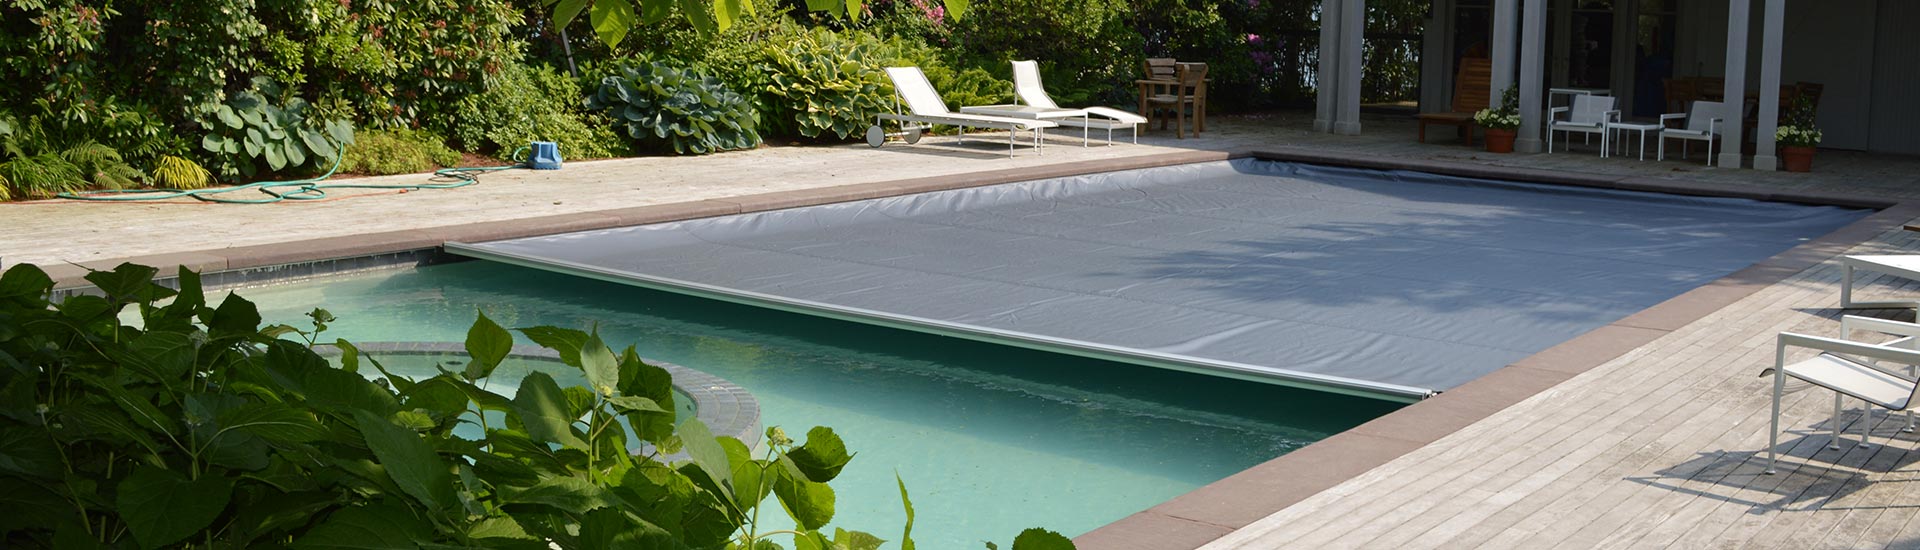 automatic pool cover motor cost